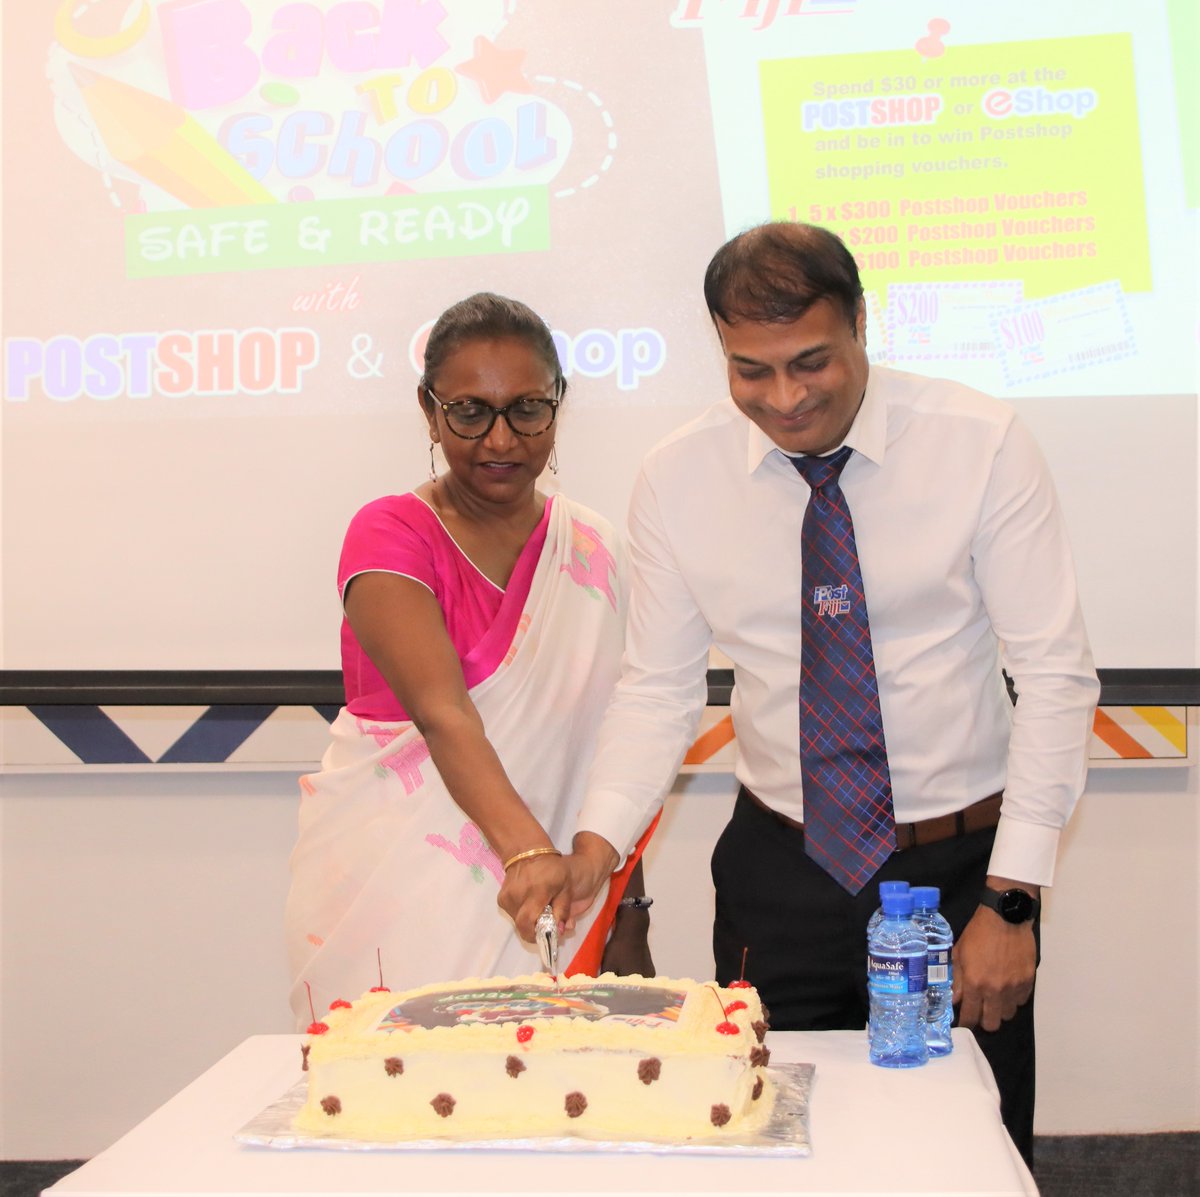 The Permanent Secretary for #Education, Heritage & Arts, Dr Anjeela Jokhan, launched the Post #Fiji’s “Back to School” Campaign which will provide parents and guardians with better deals as they prepare for the 2023 academic year. Read more:bit.ly/3jeI2MA